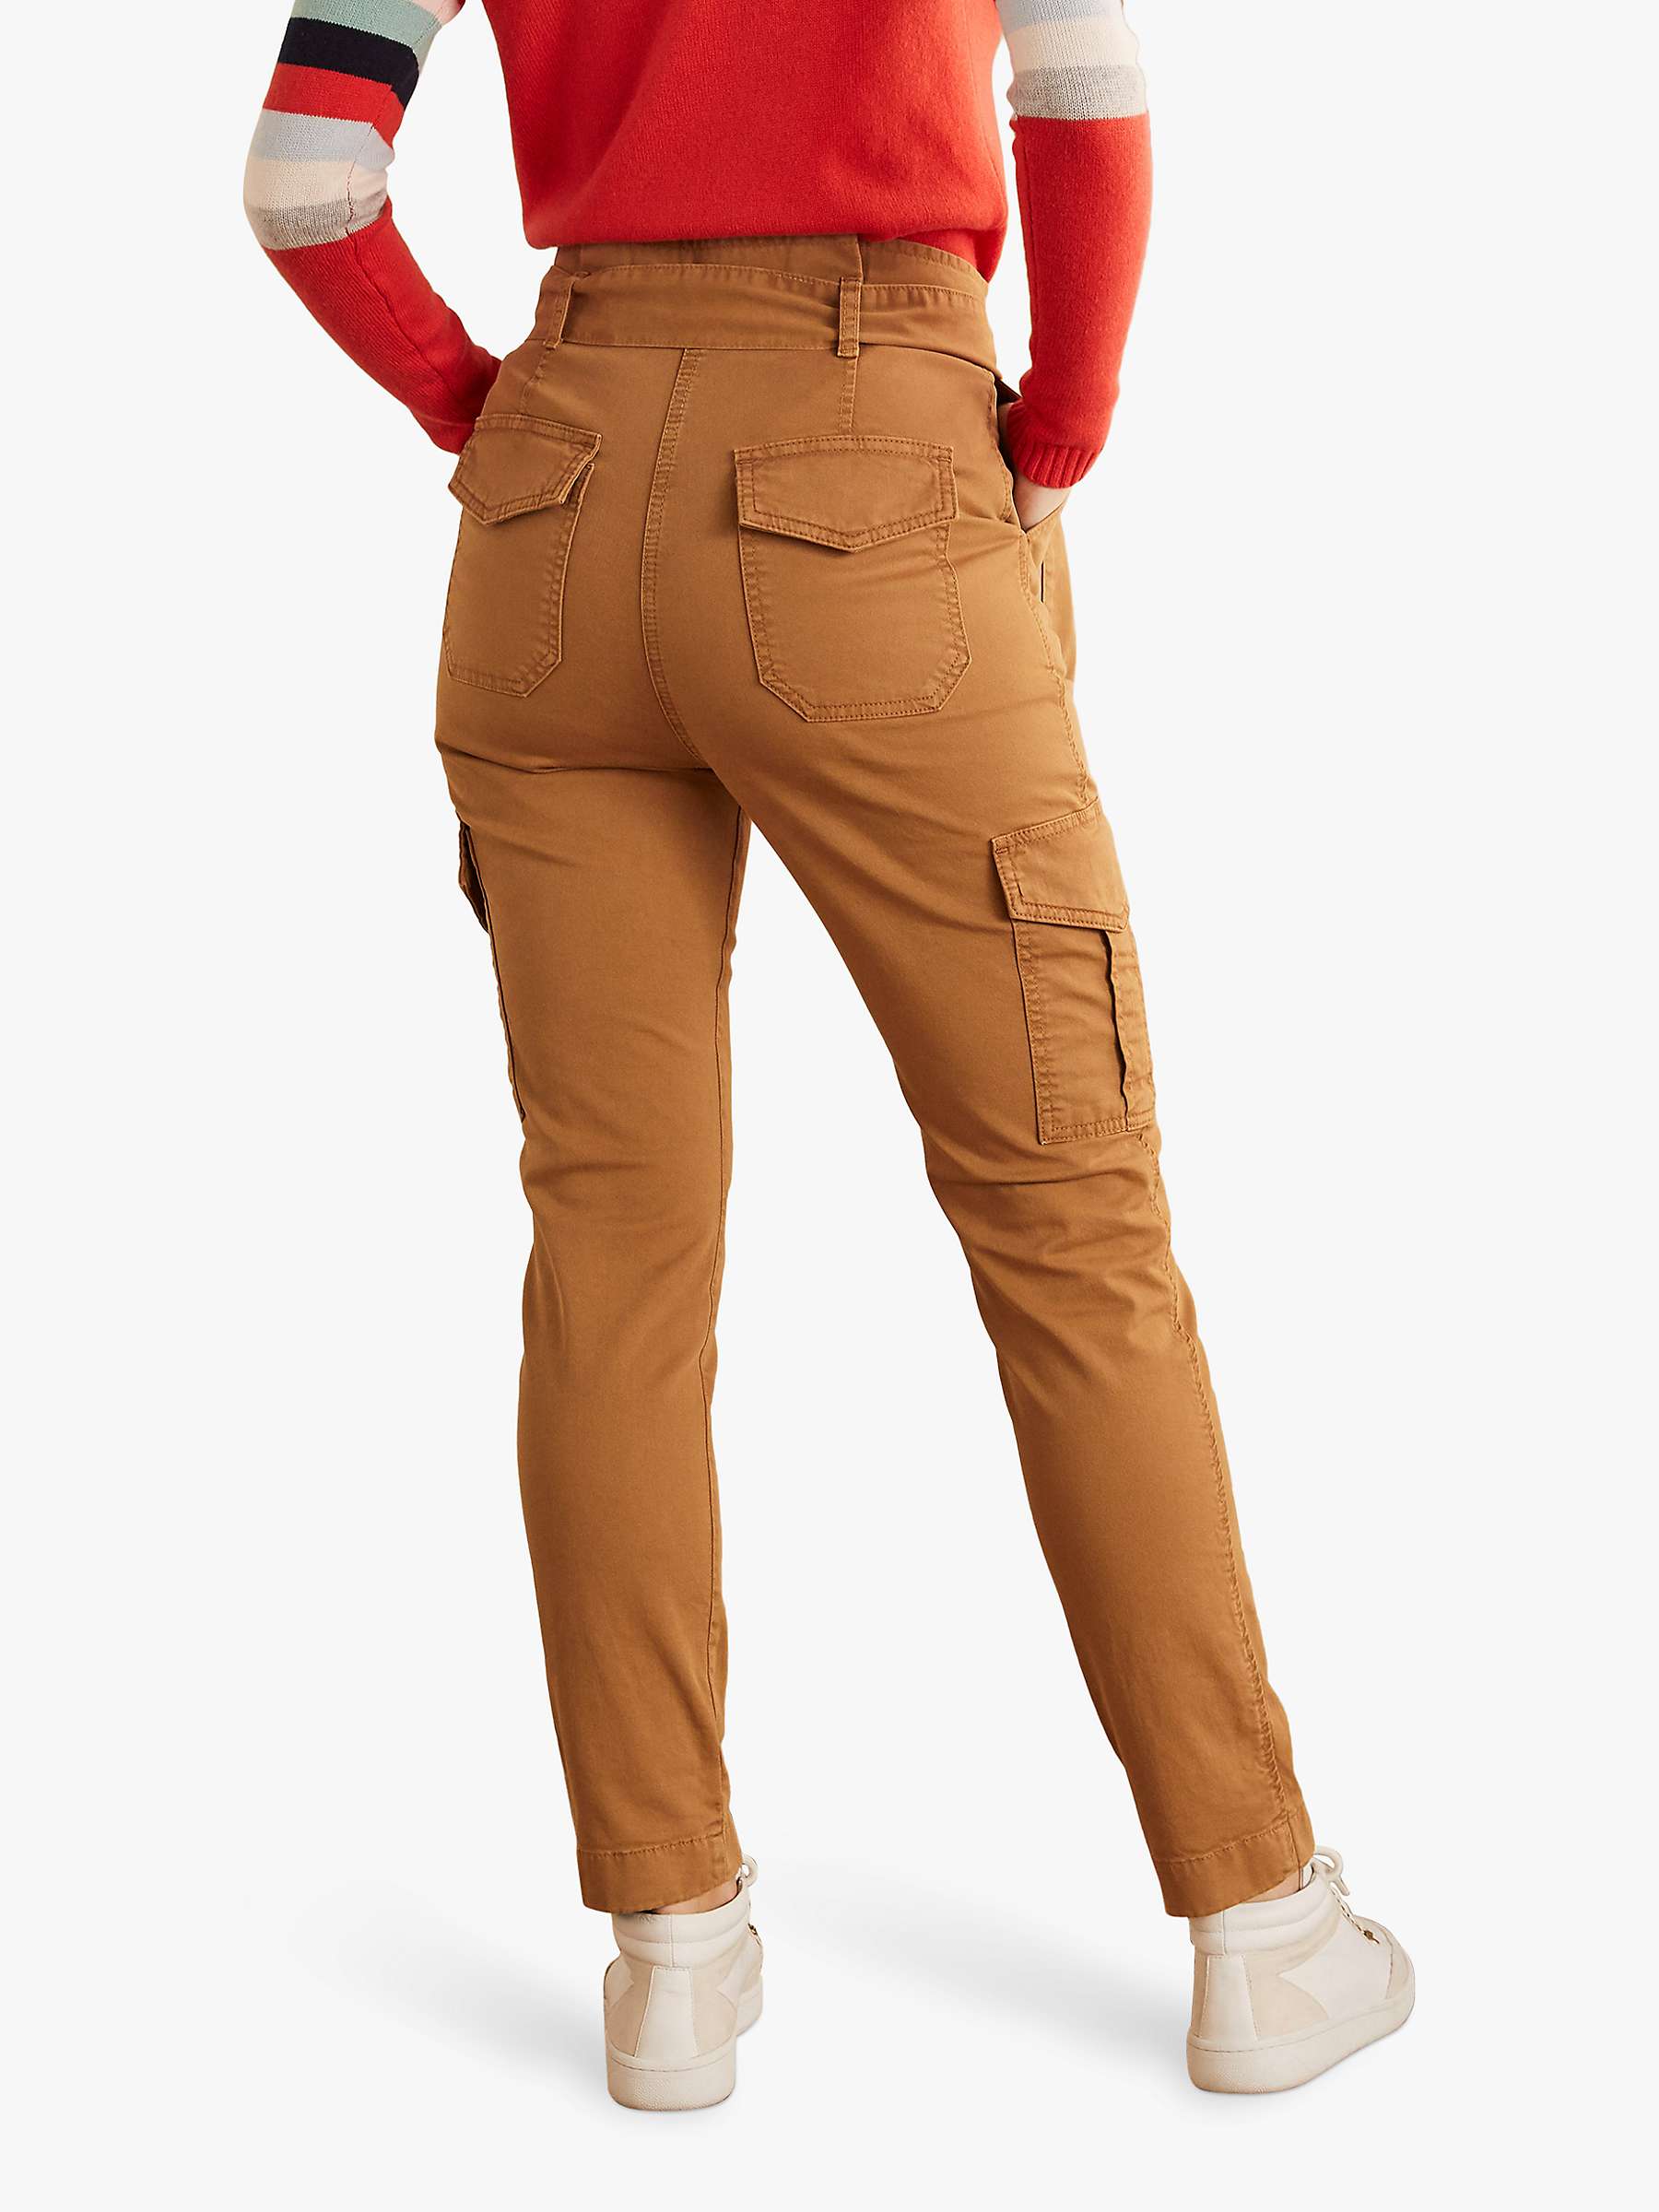 Boden Cargo Trousers, Camel at John Lewis & Partners